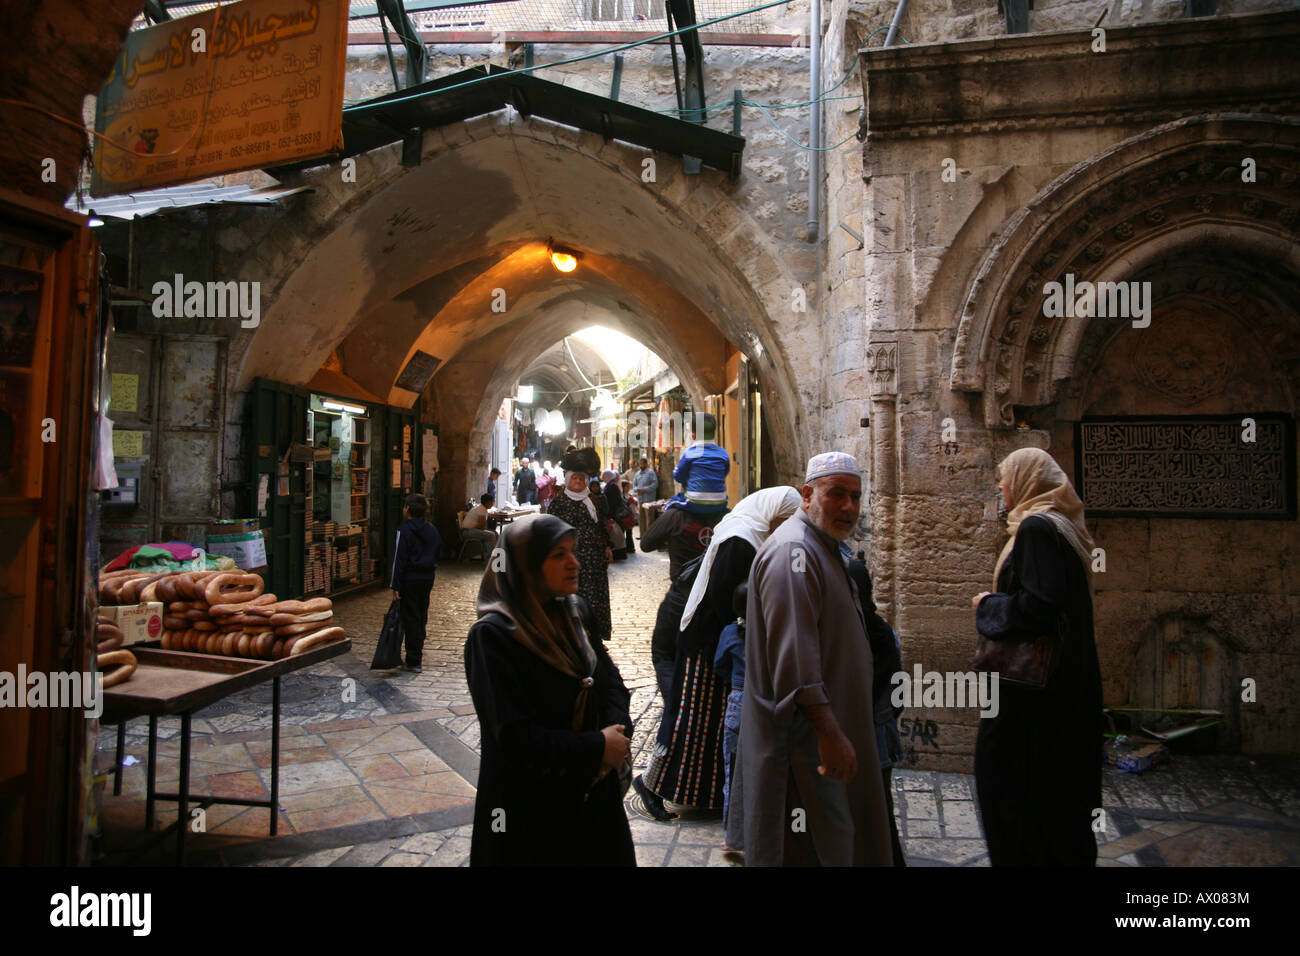 Shoppers browse at a market in the old city section of Jerusalem Stock Photo